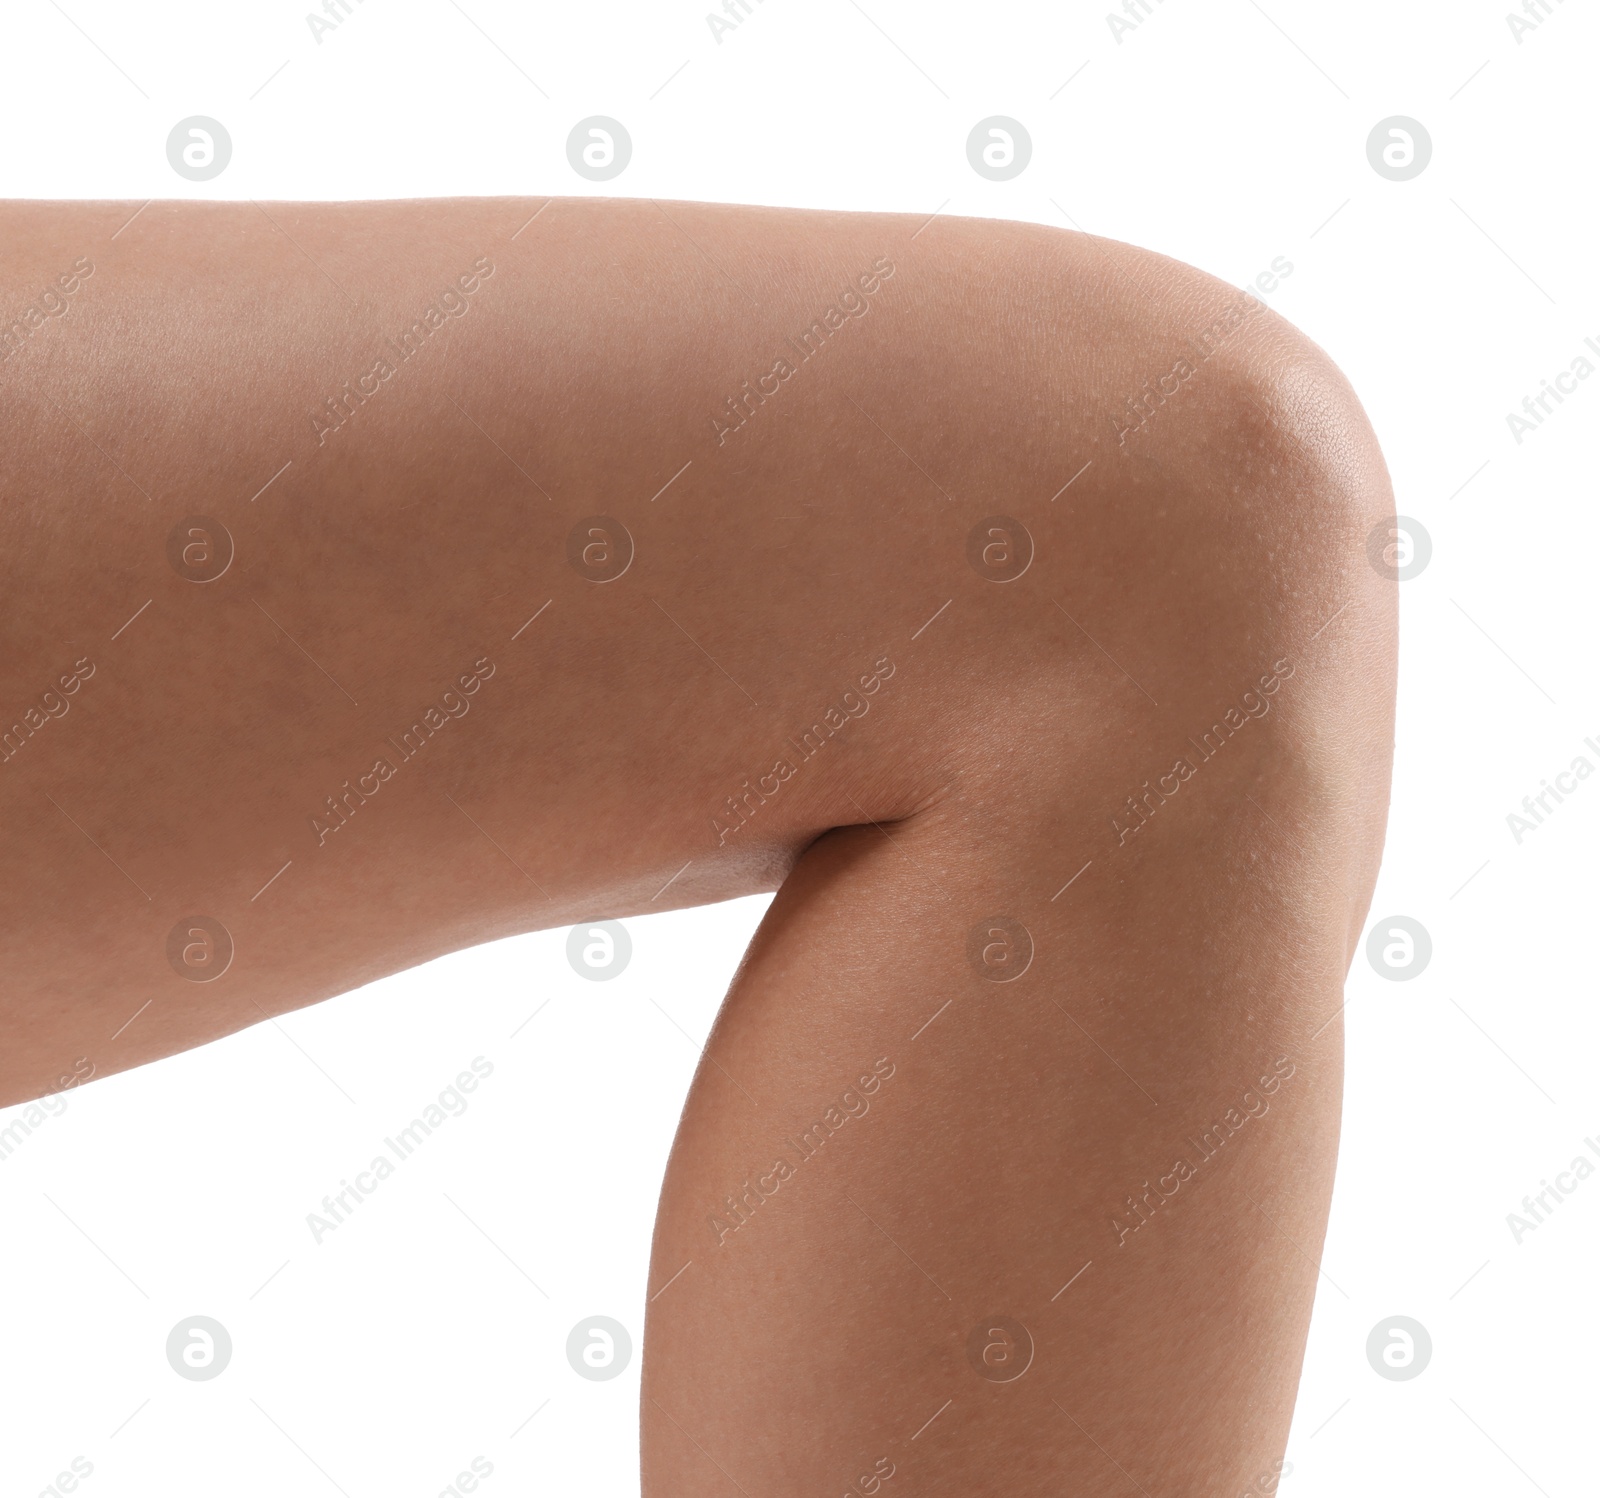 Photo of Woman with slim legs on white background, closeup